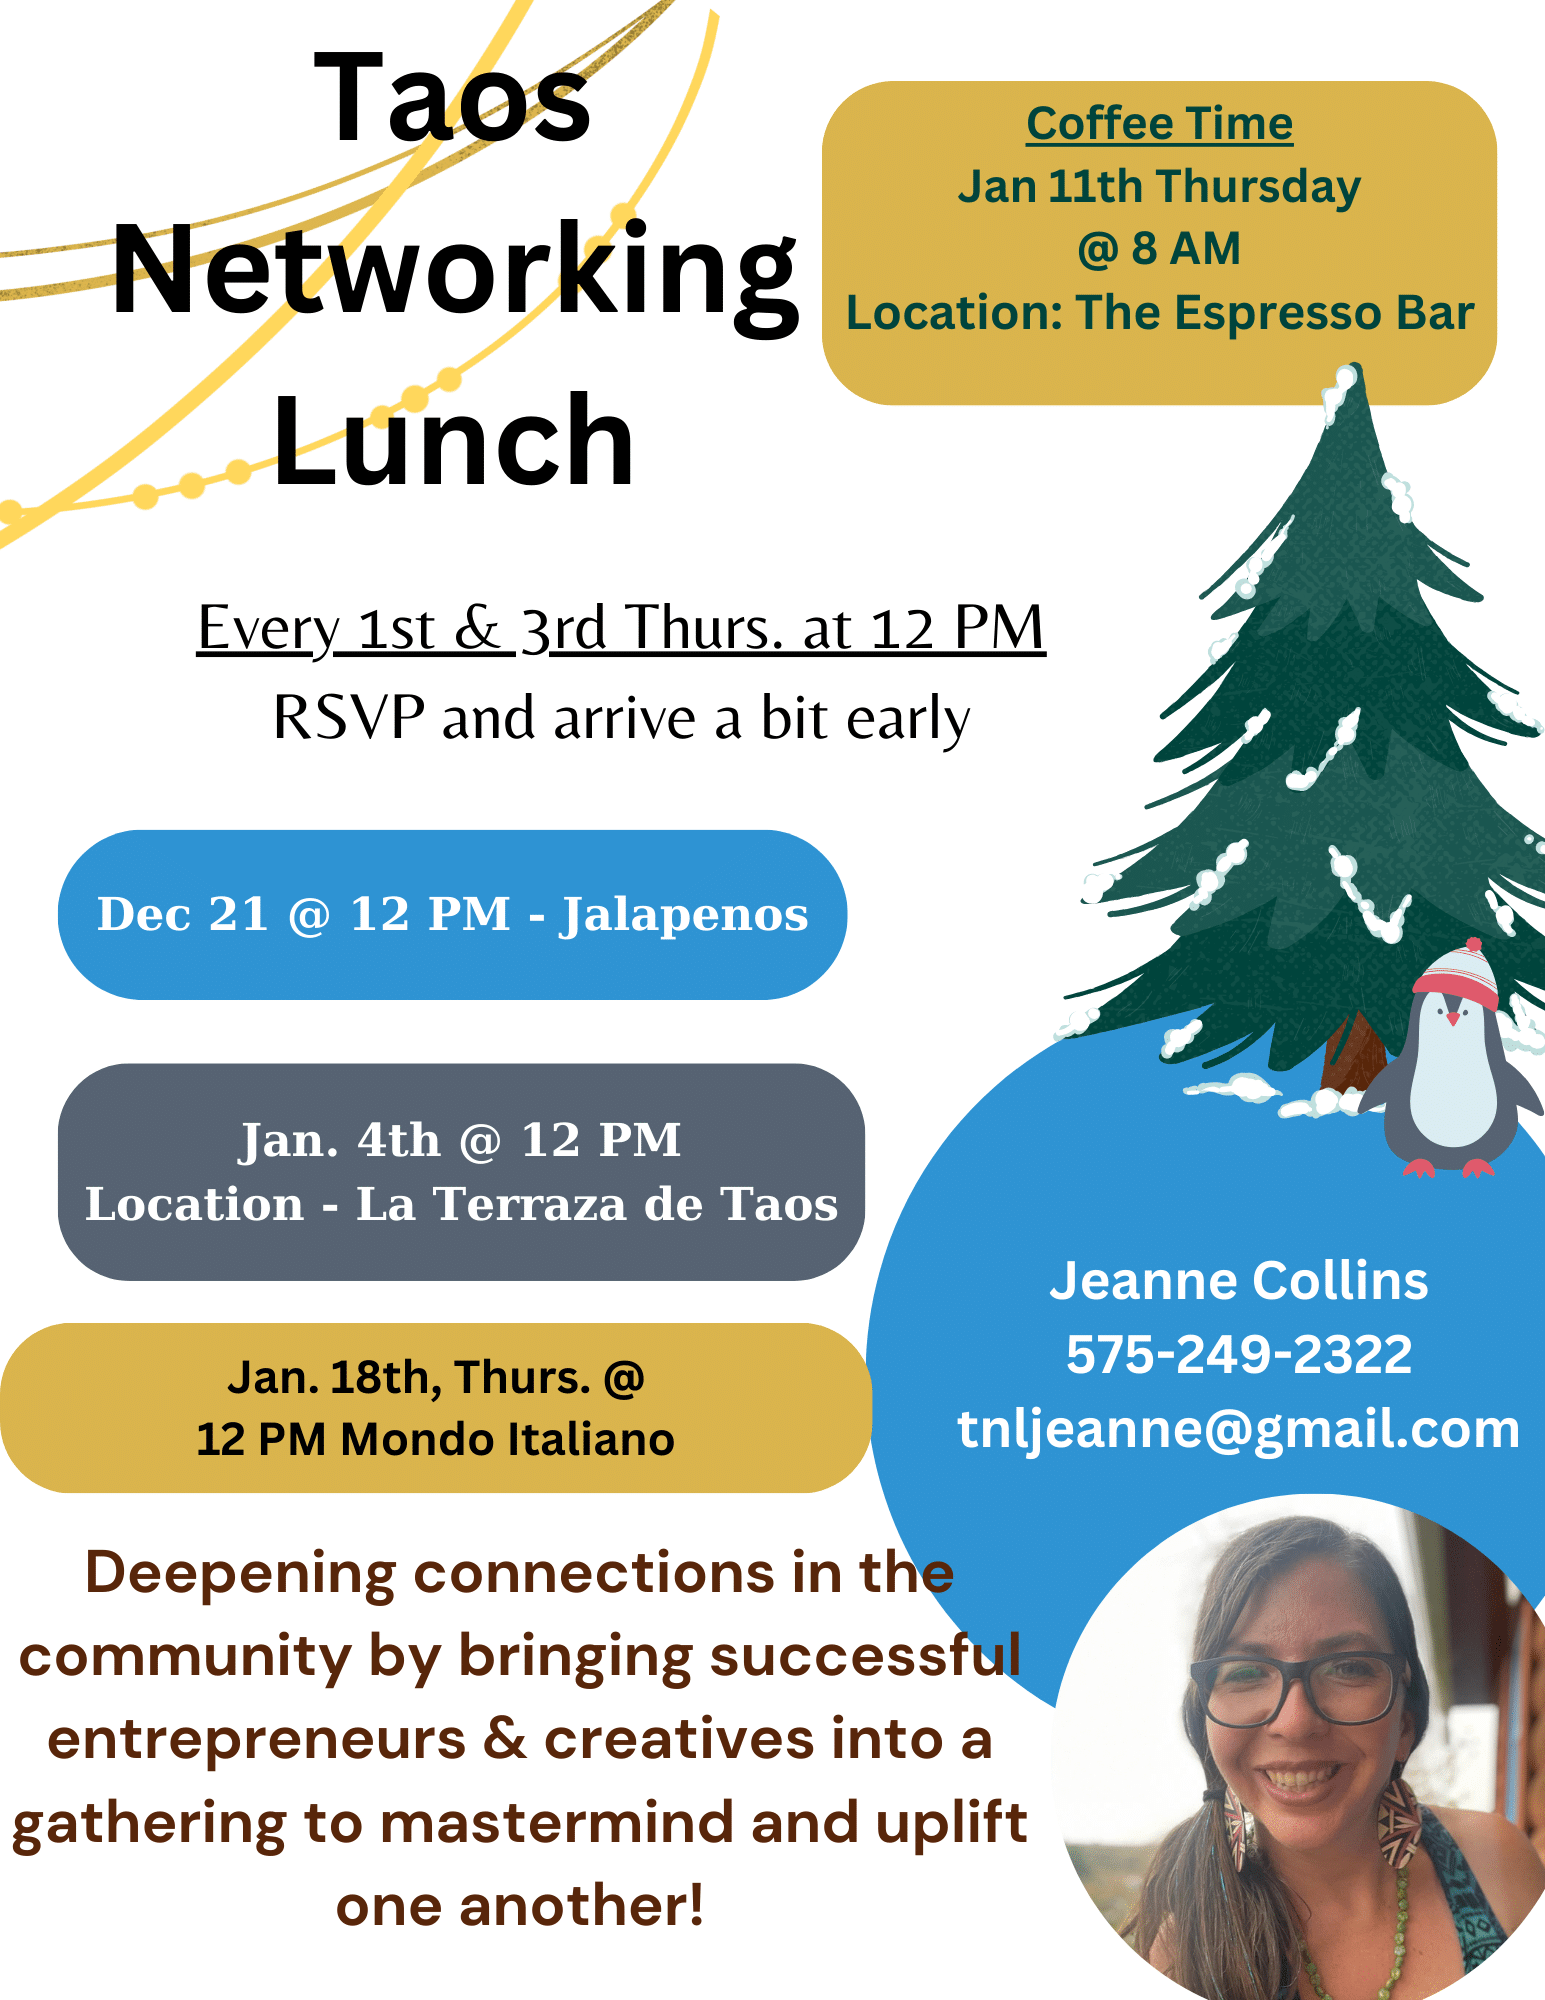 Taos Networking Lunch Coffee Time! Live Taos Events Calendar